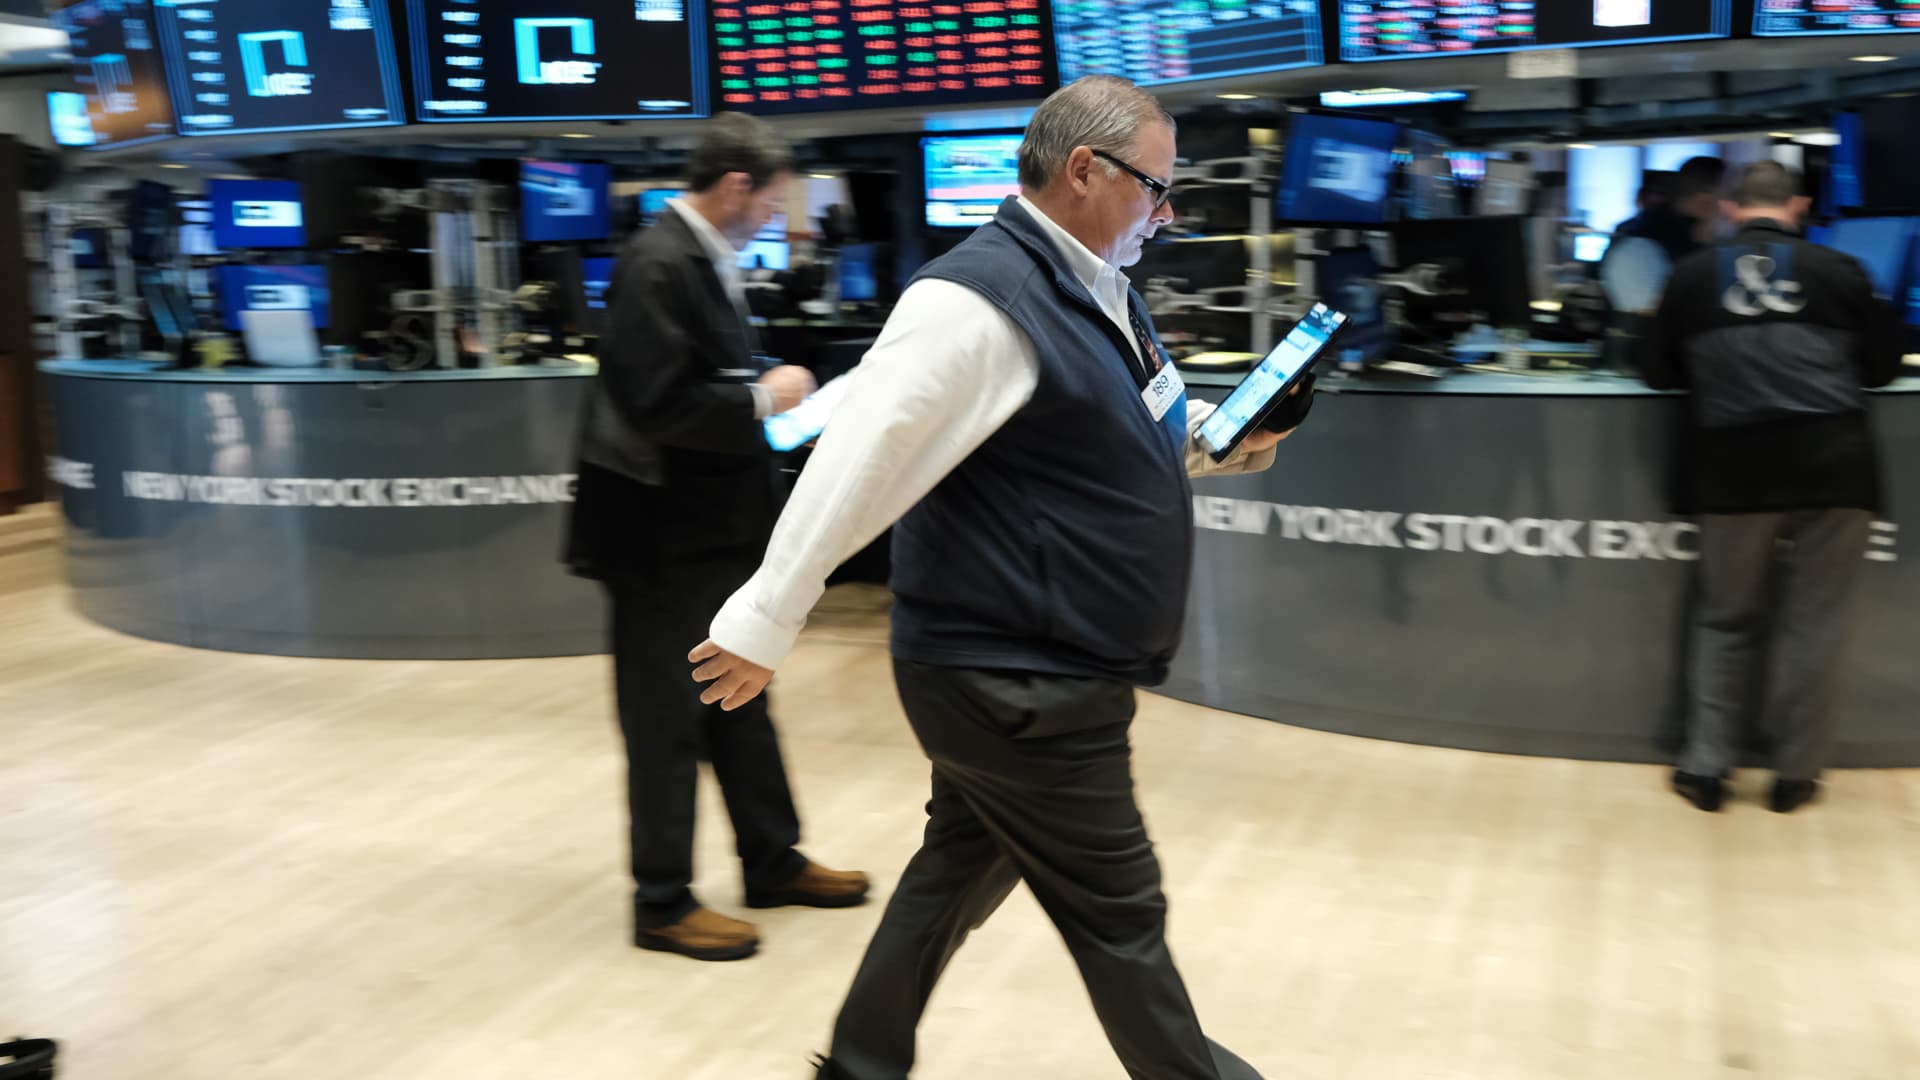 Stock futures tick up slightly on Wednesday after two-day market rally ends – CNBC